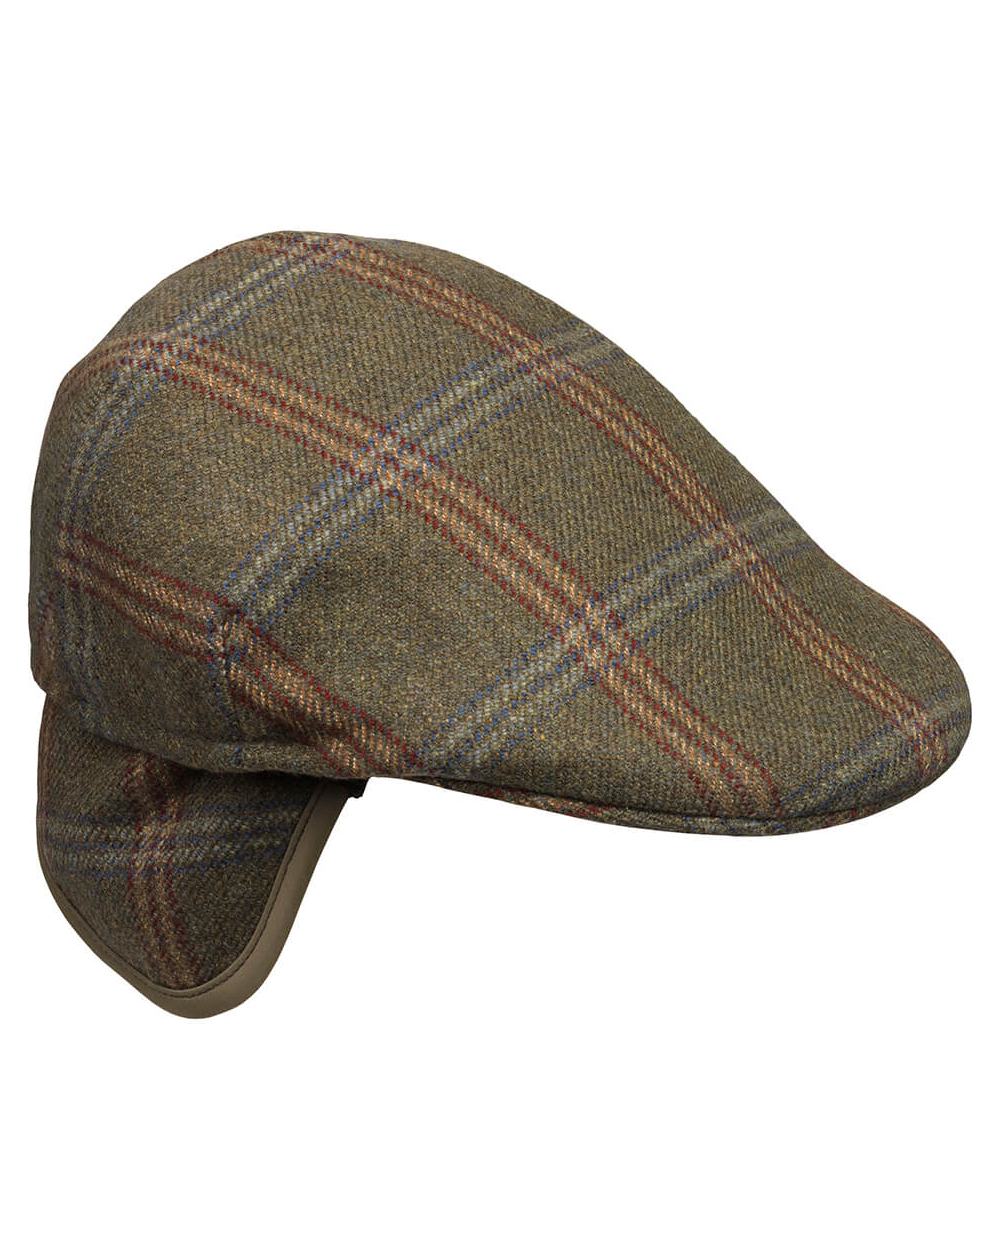 Laksen Chester Ghillies Flat Cap With Earwarmer On A White Background